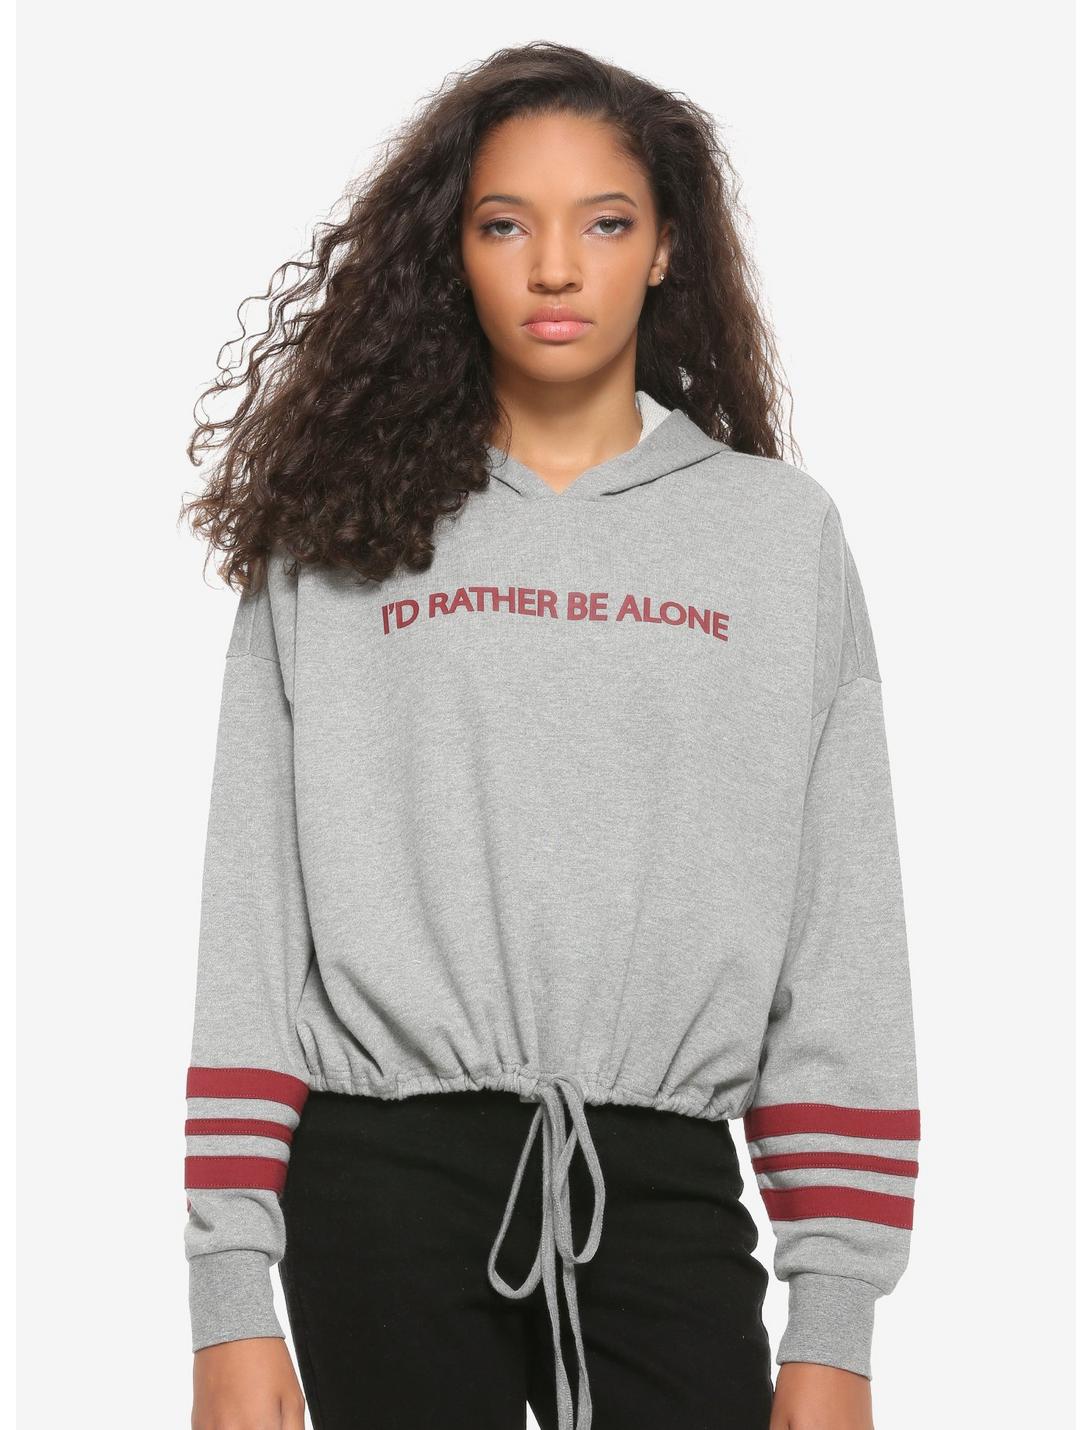 I'd Rather Be Alone Drawstring Waist Girls Hoodie, RED, hi-res